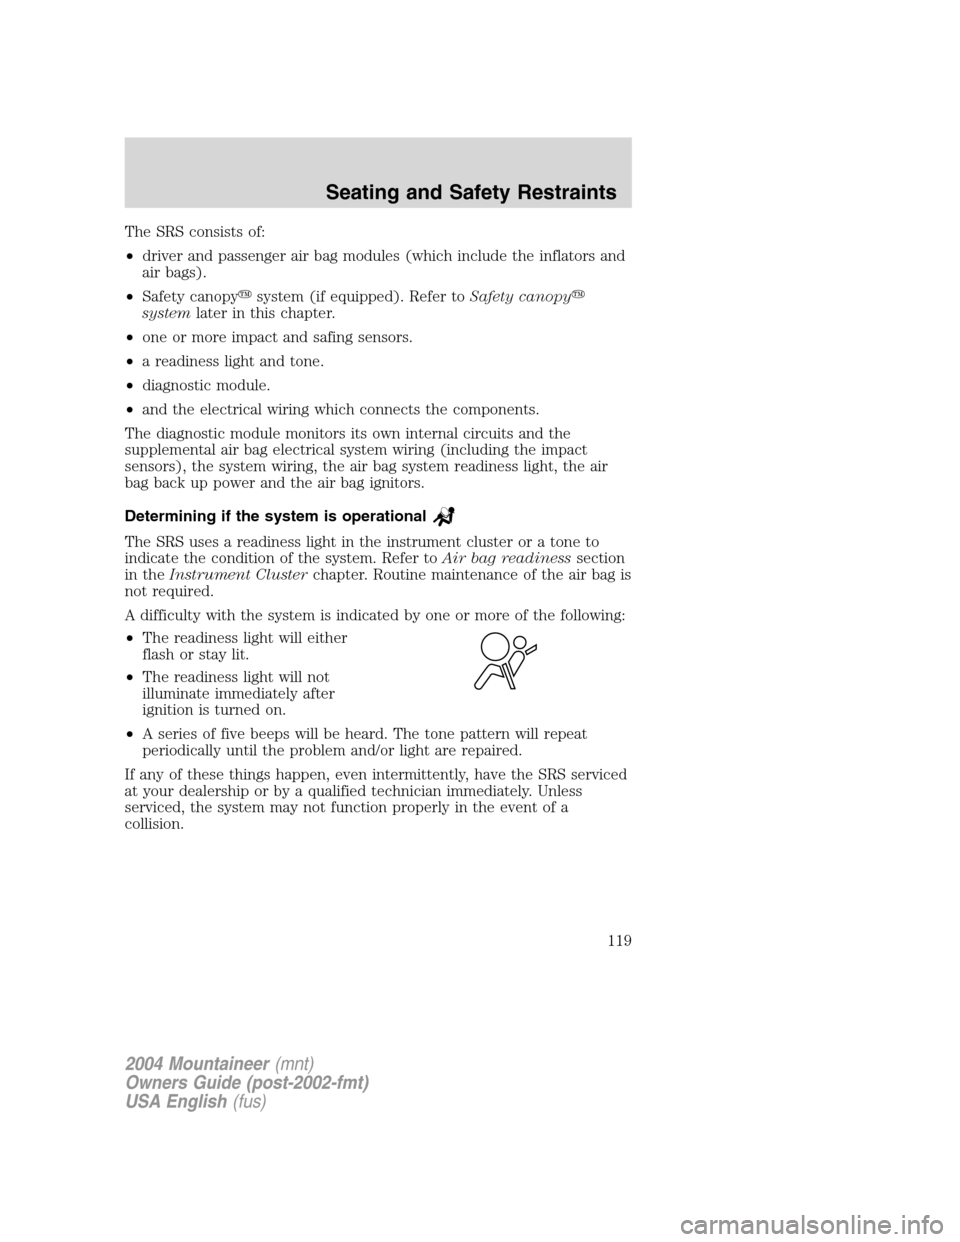 Mercury Mountaineer 2004  s User Guide The SRS consists of:
•driver and passenger air bag modules (which include the inflators and
air bags).
•Safety canopysystem (if equipped). Refer toSafety canopy
systemlater in this chapter.
•o